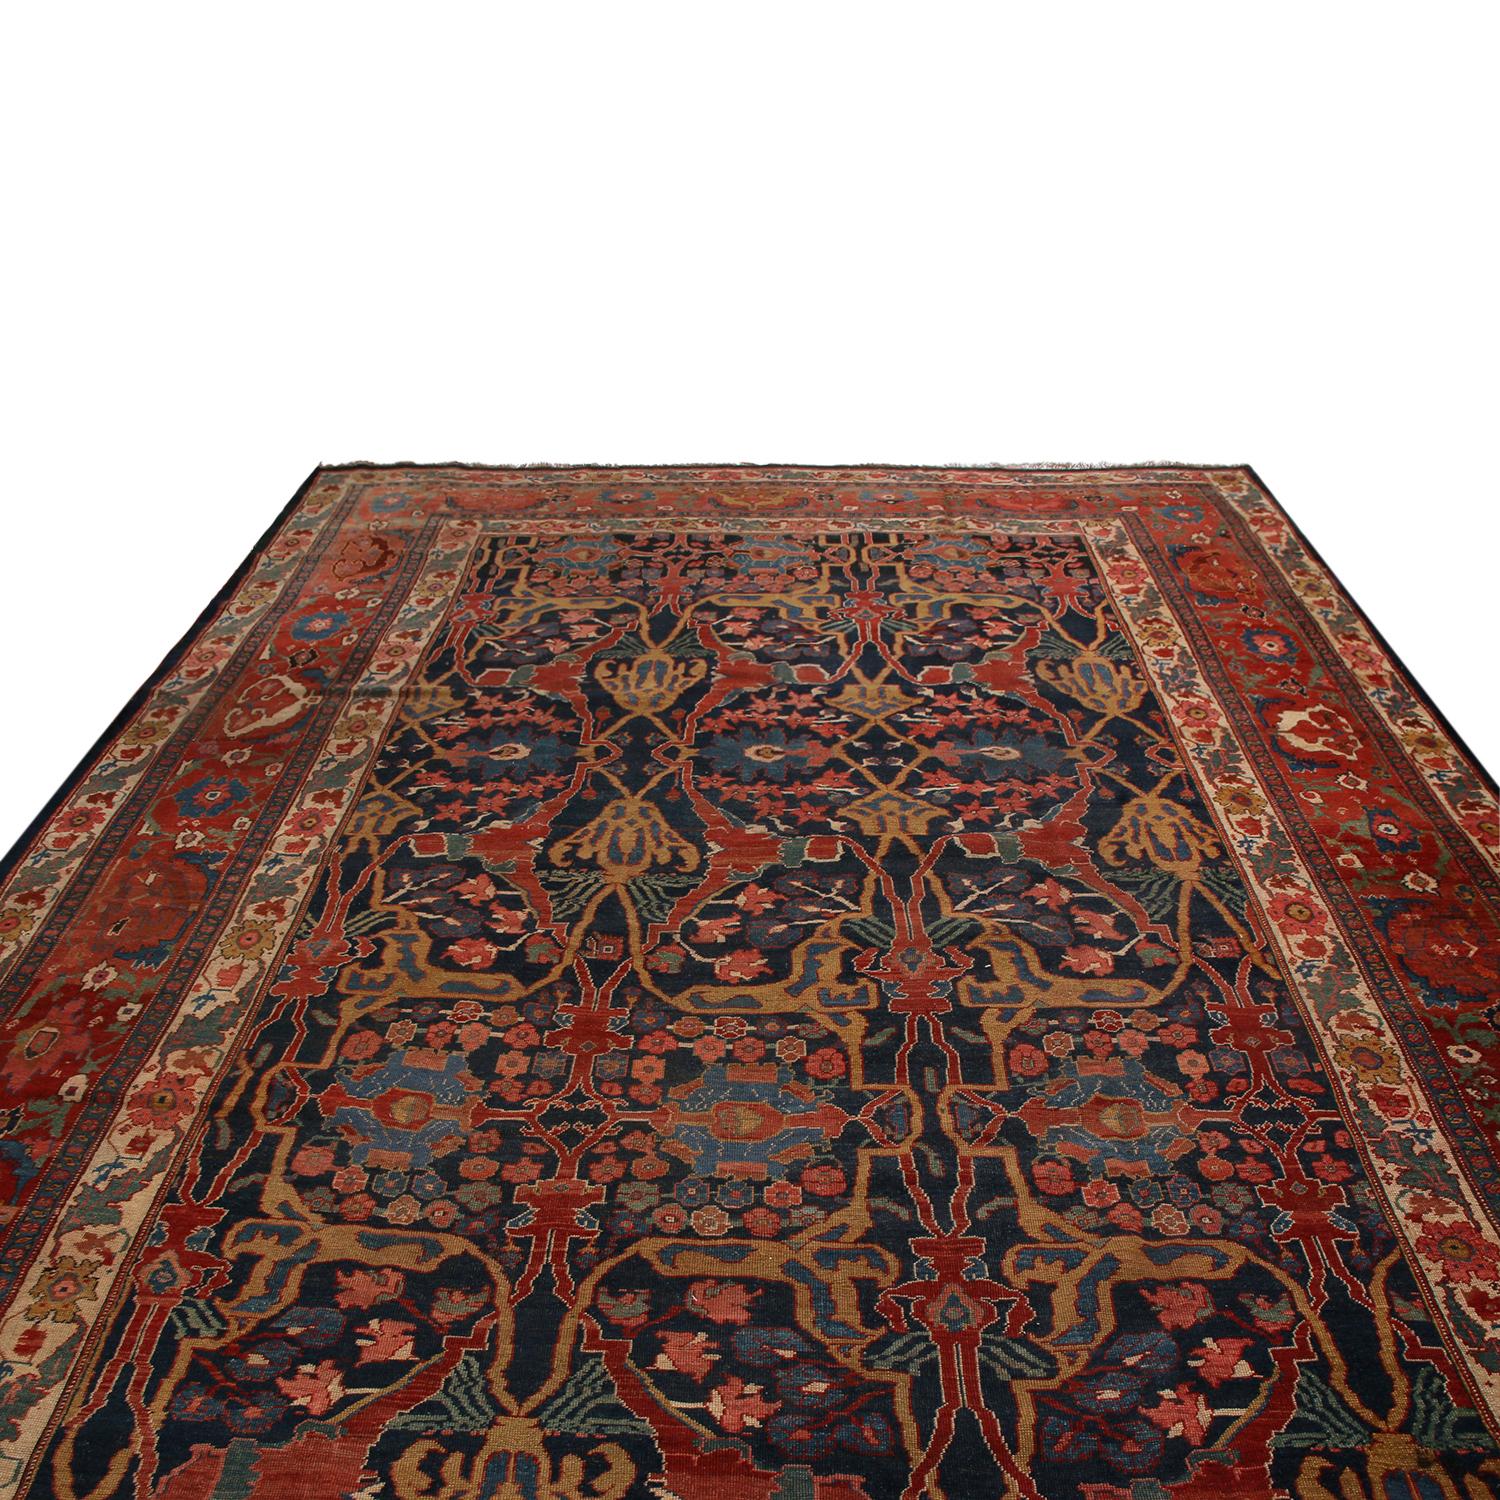 Originating from Persia between 1900-1910, this antique Bidjar Persian rug enjoys tasteful highlights of complementary bronze-orange and gentle green hues accenting the burgundy red and Egyptian blue colorways throughout the field and border. Hand